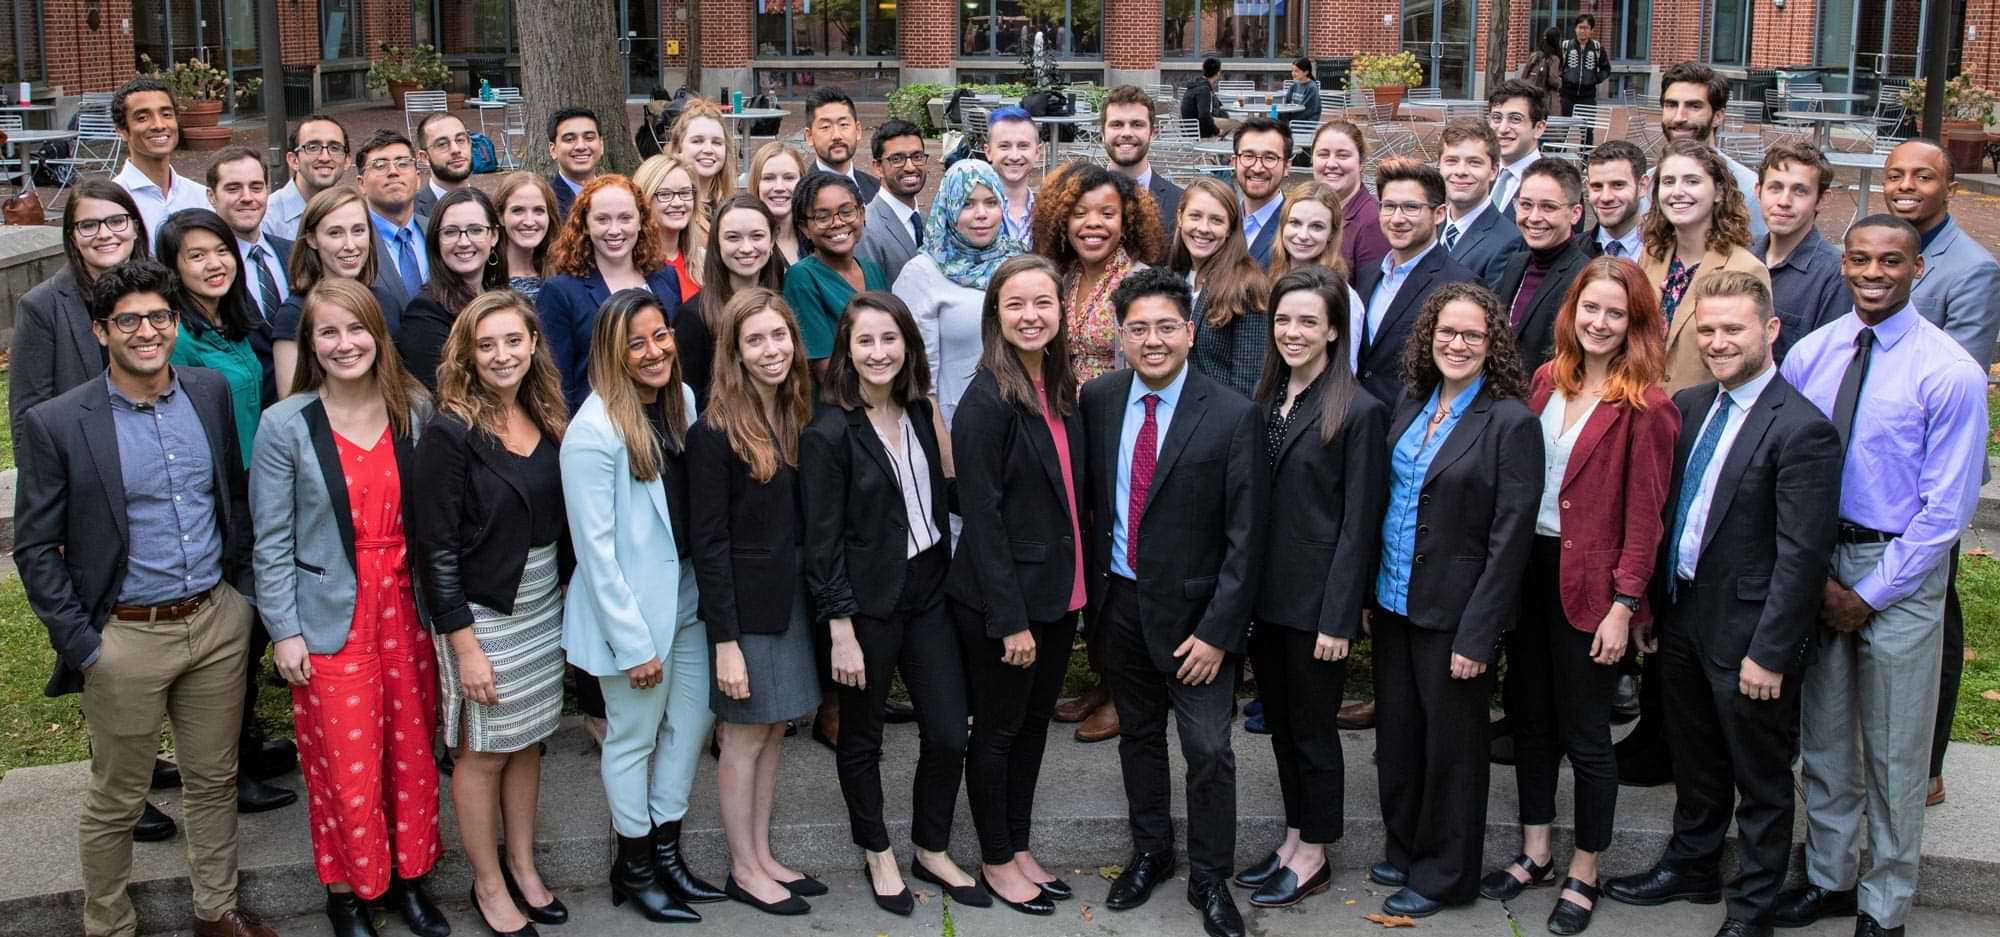 Penn Carey Law students dressed in casual business attire in a smile for a large outdoor group photo